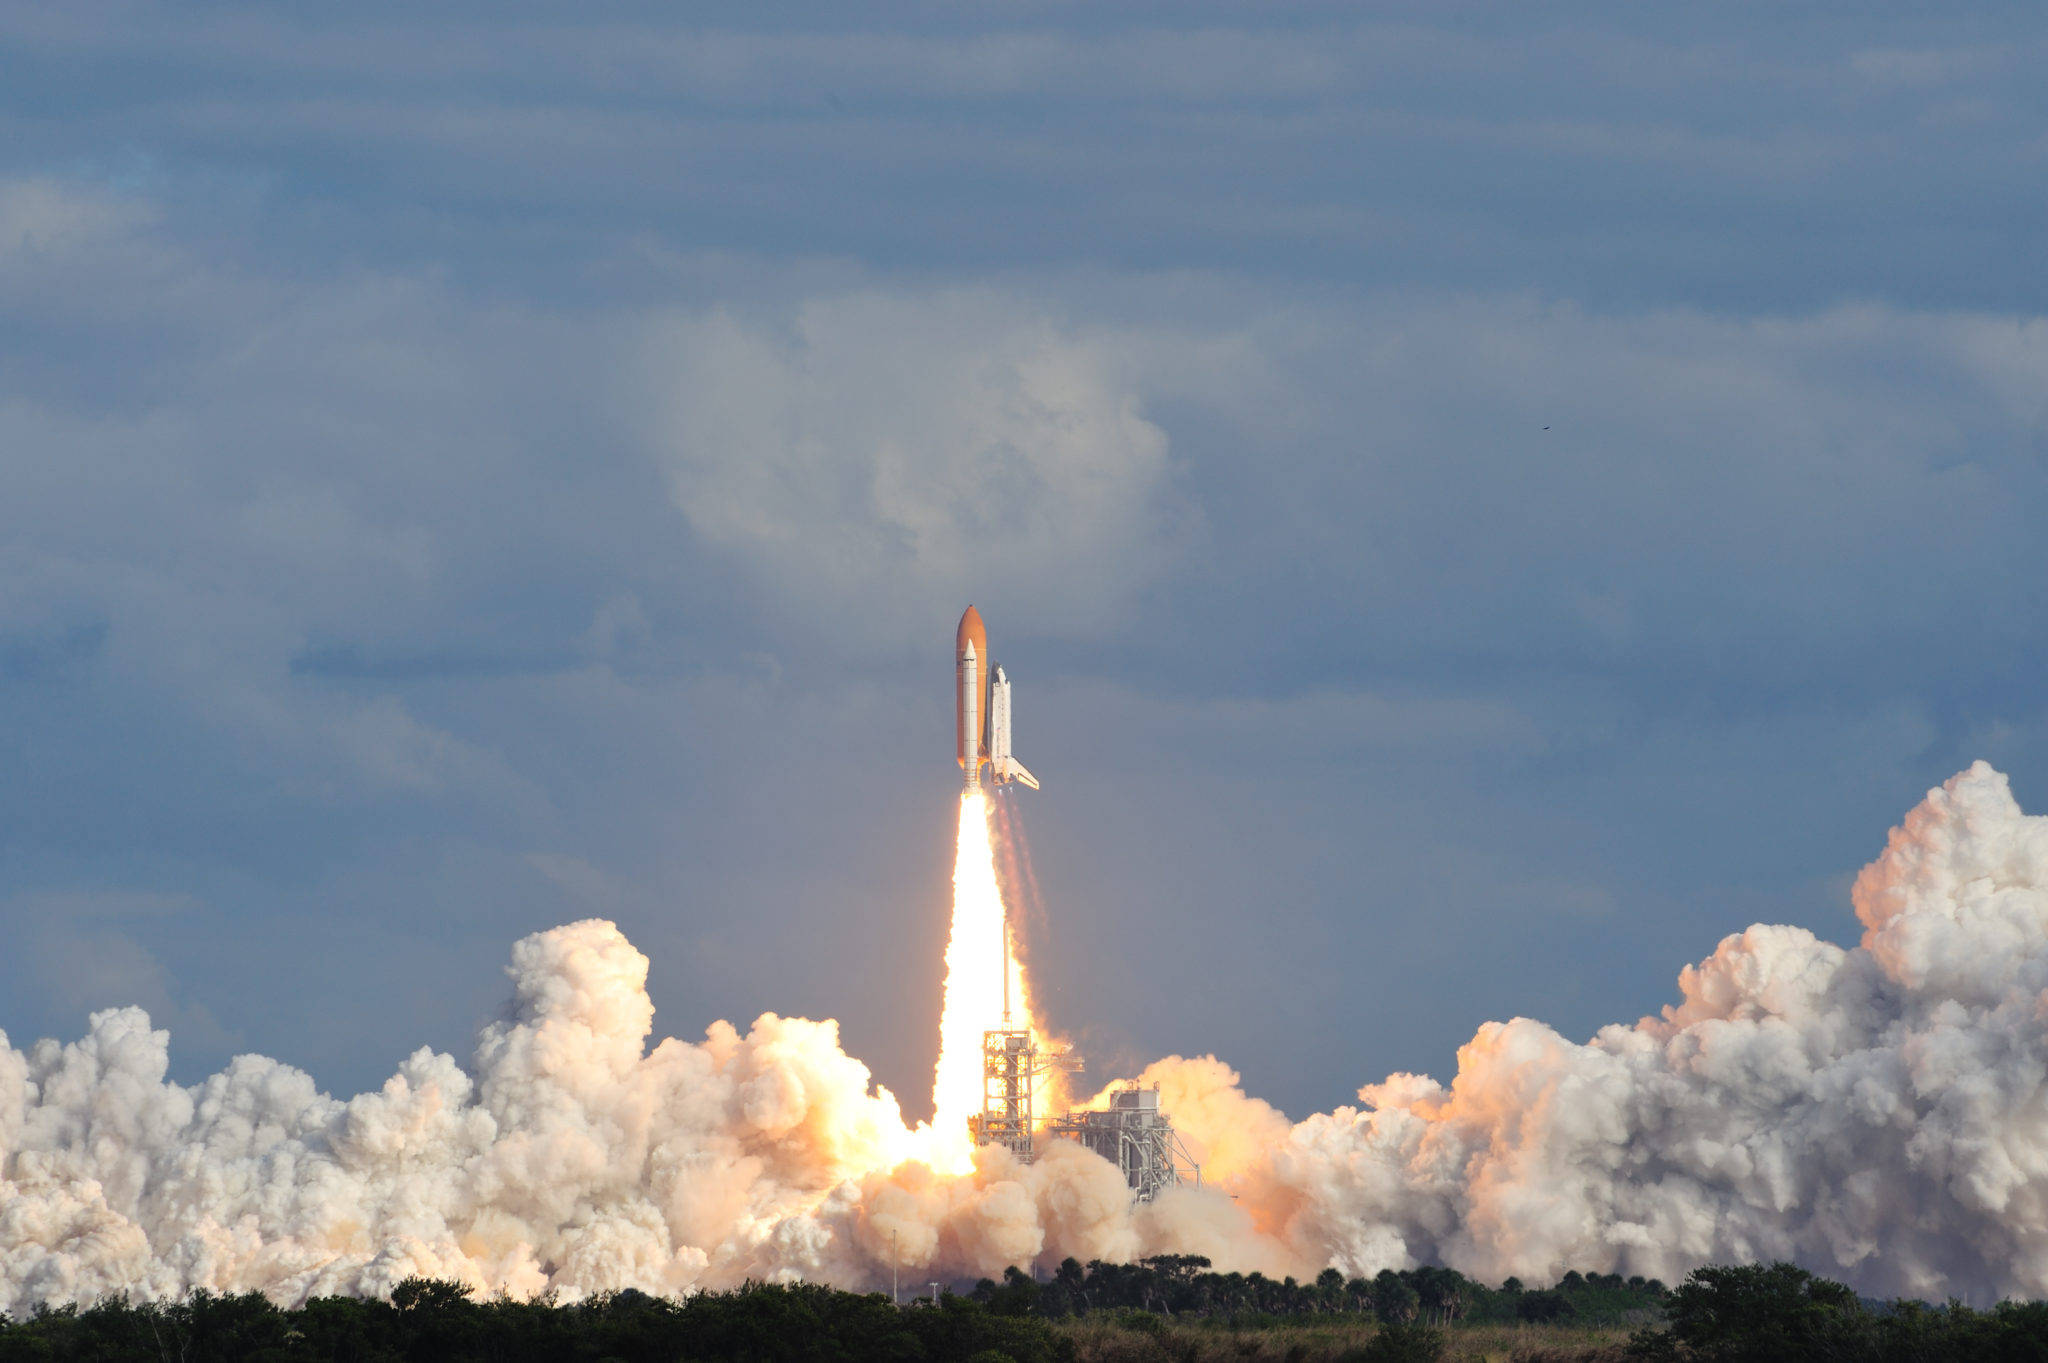 5 Tips For Launching a Native Ad Offering From 5 Top Publishers